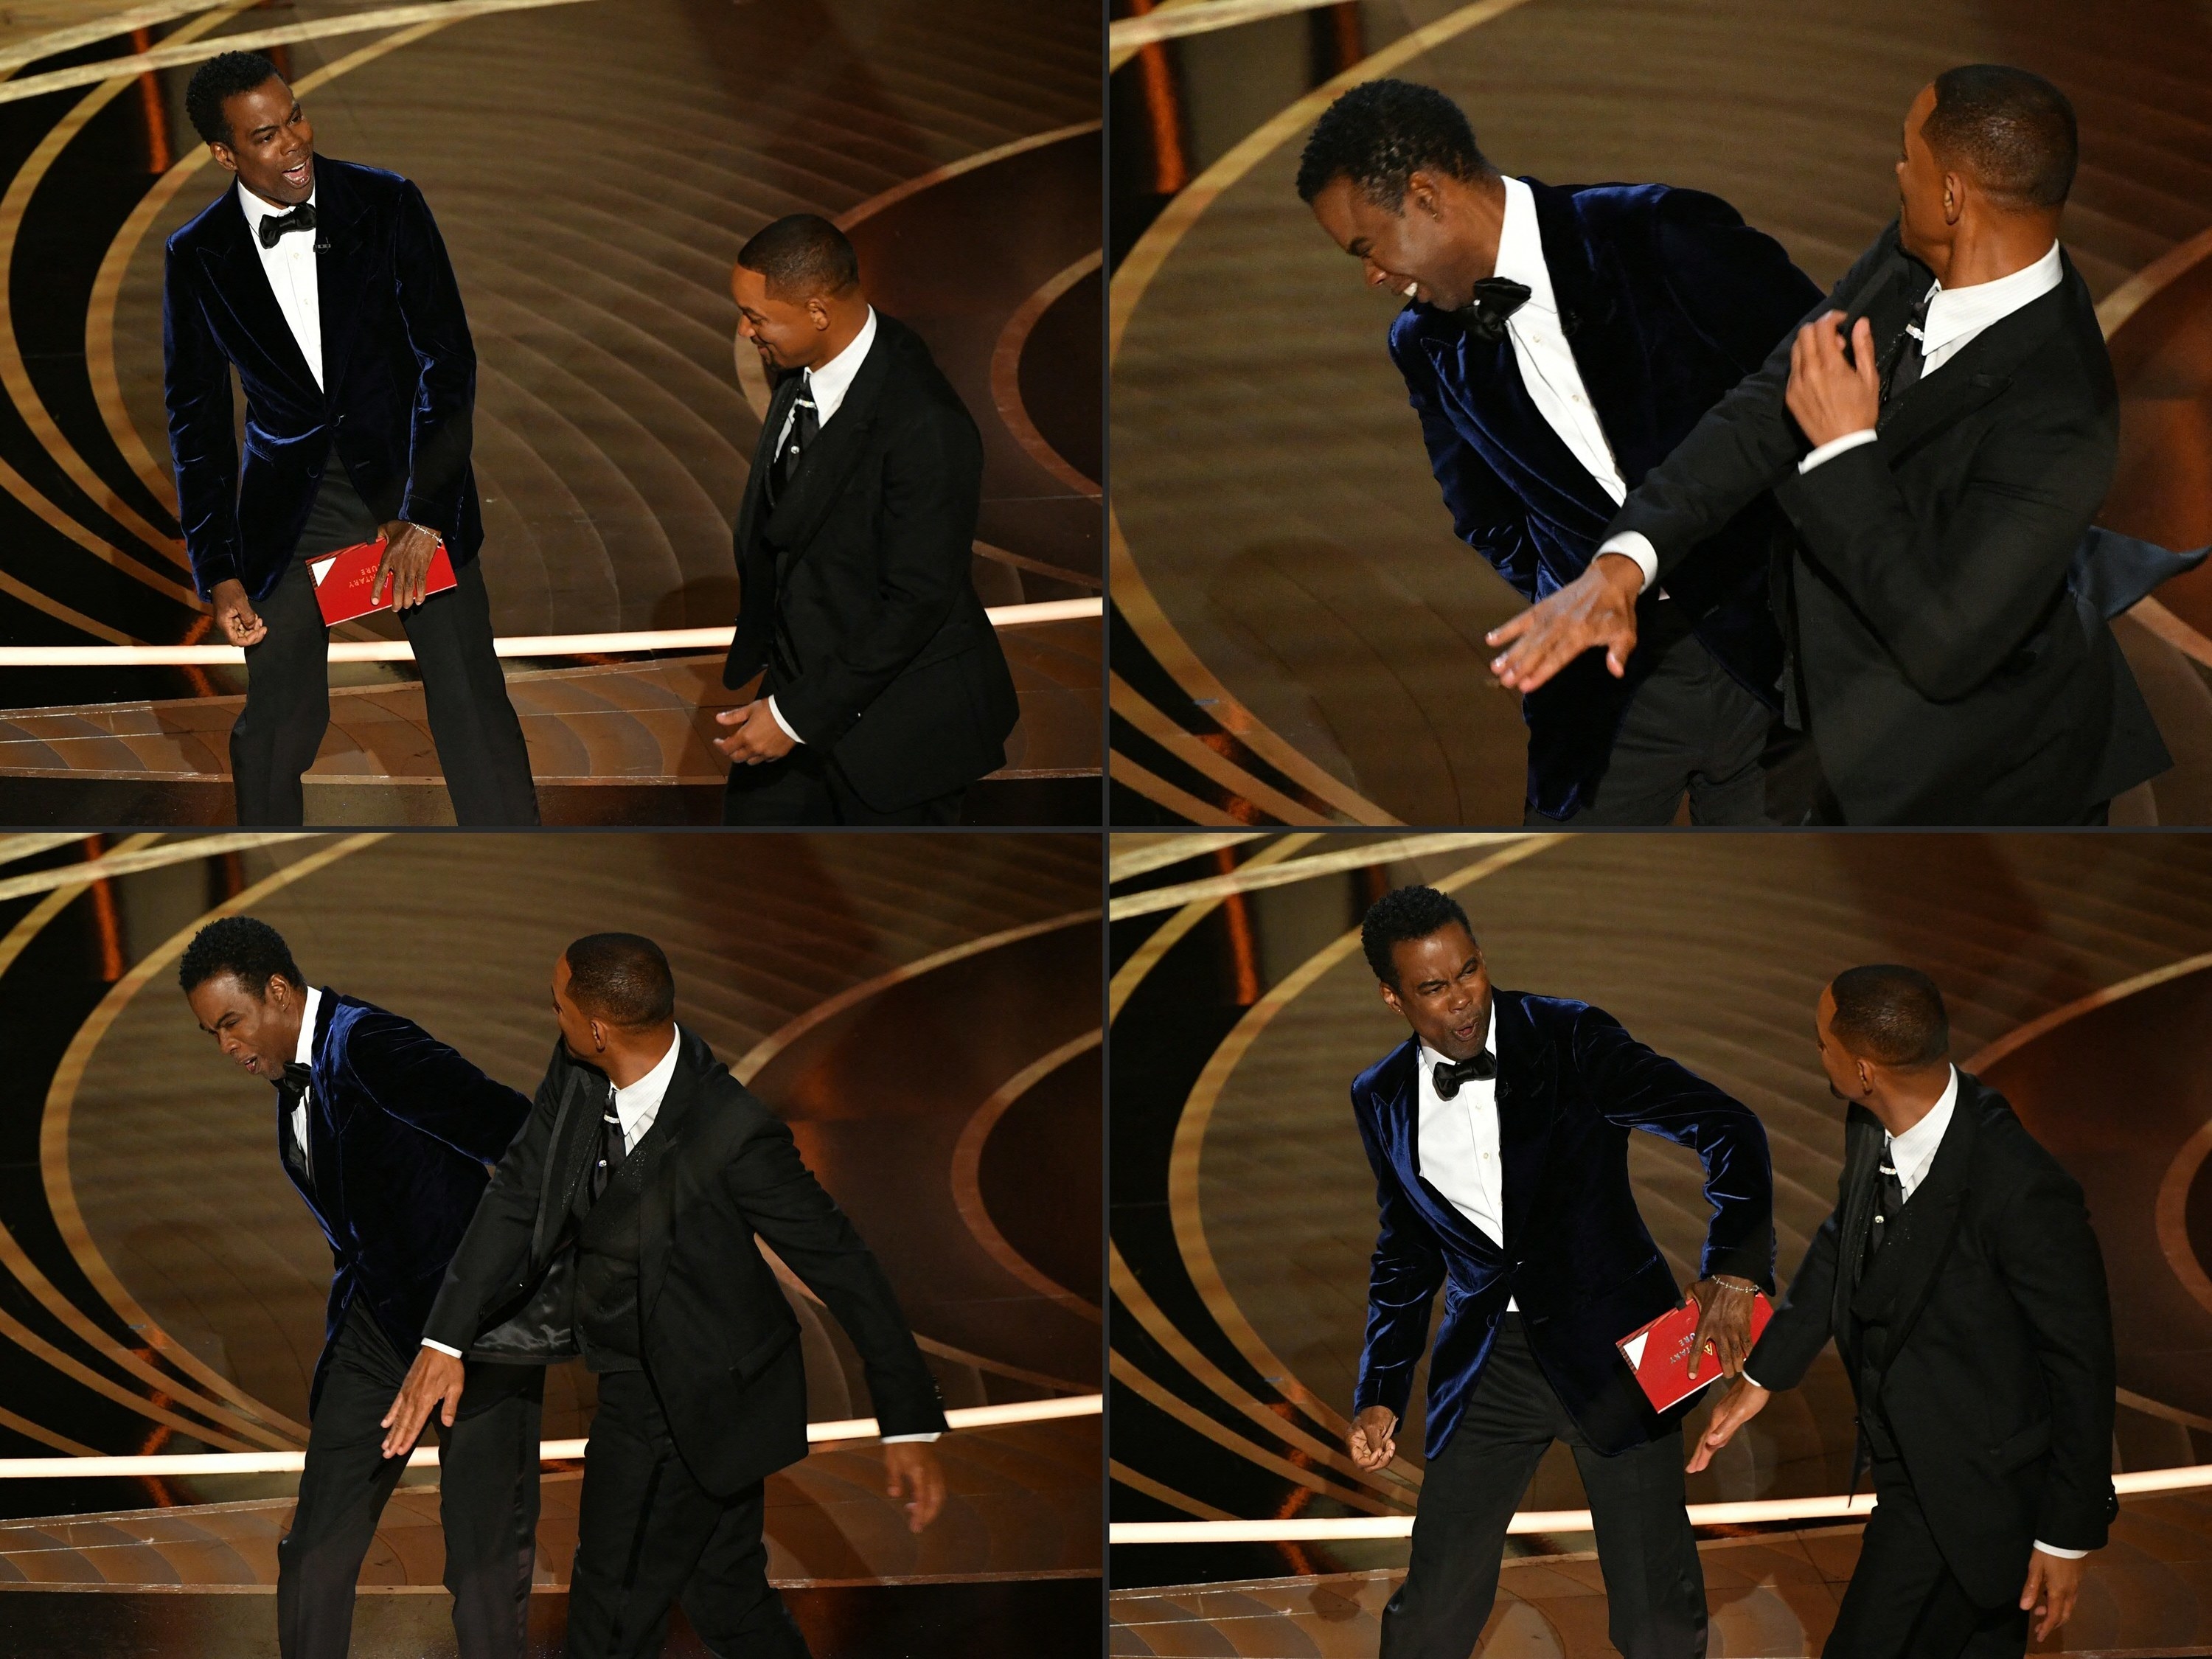 Will Smith slapping Chris Rock on stage during the 2022 Oscars